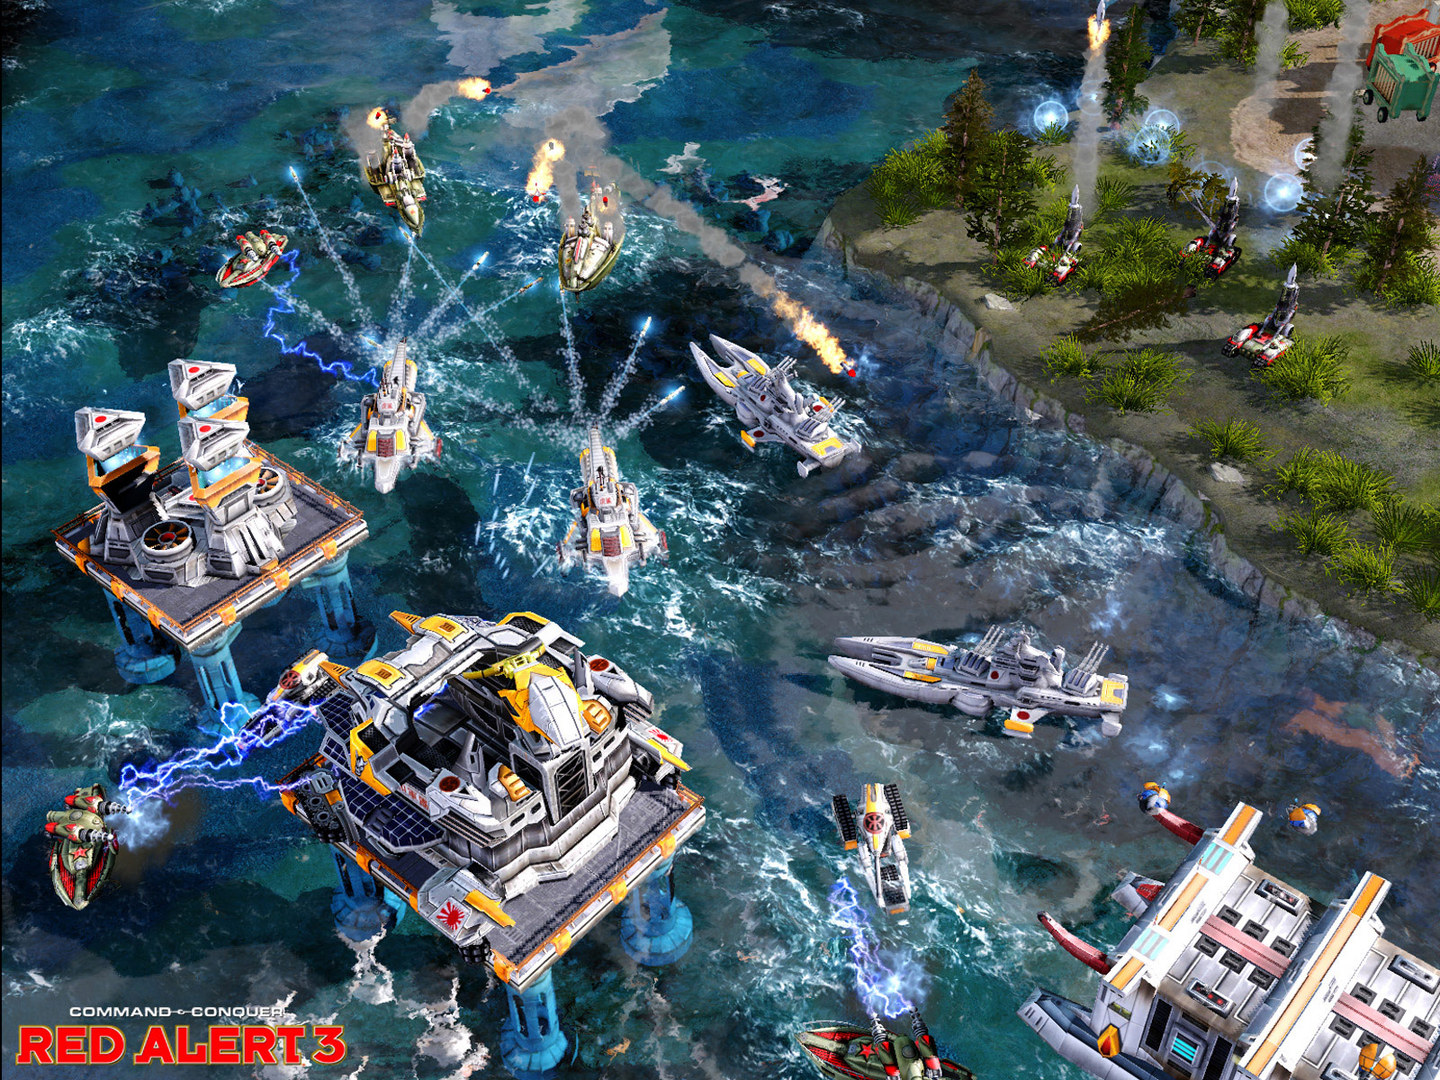 Command and Conquer Red Alert 3 PC Version Game Free Download